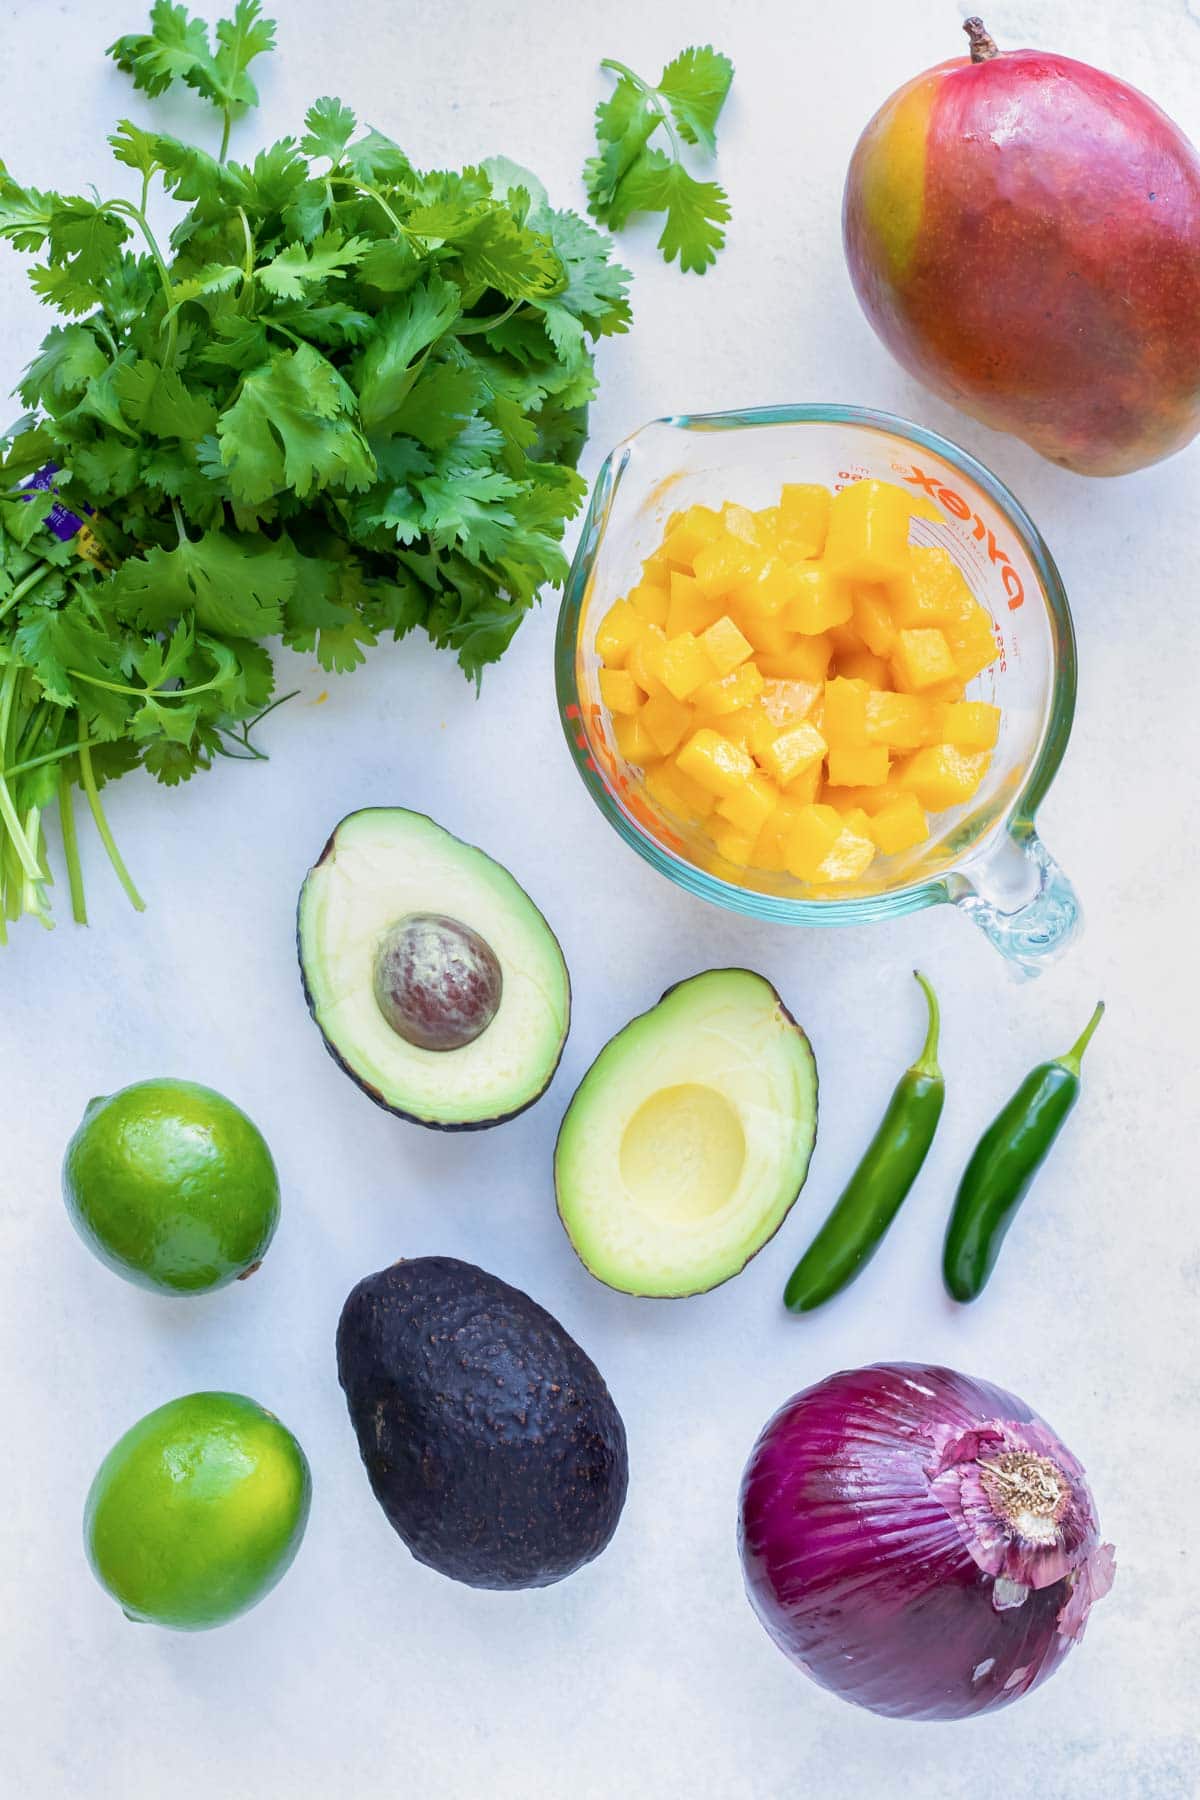 Fresh mango, avocado, serrano peppers, limes, red onion, and cilantro as the ingredients needed for a salsa recipe.